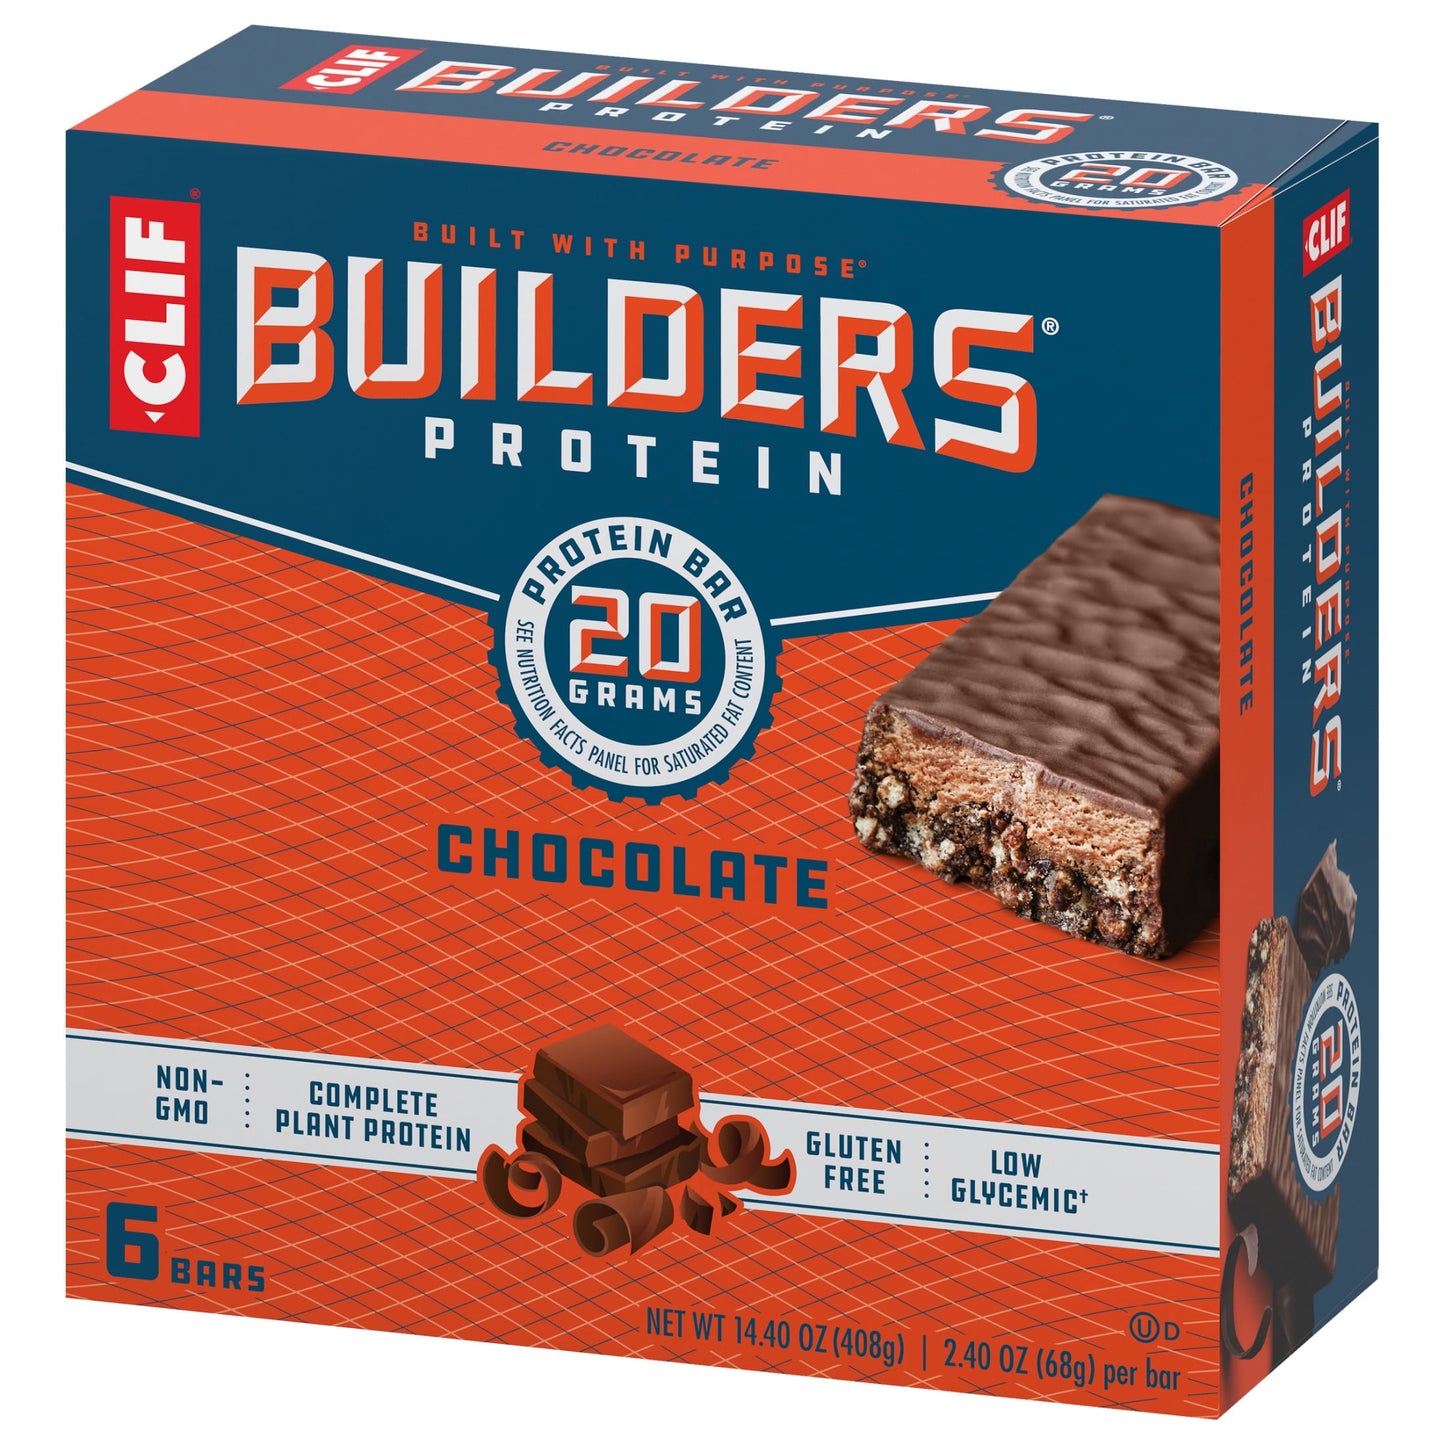 CLIF Builders - Chocolate Flavor - Protein Bars - Gluten-Free - Non-Gmo - Low Glycemic - 20G Protein - 2.4 Oz. (6 Pack)